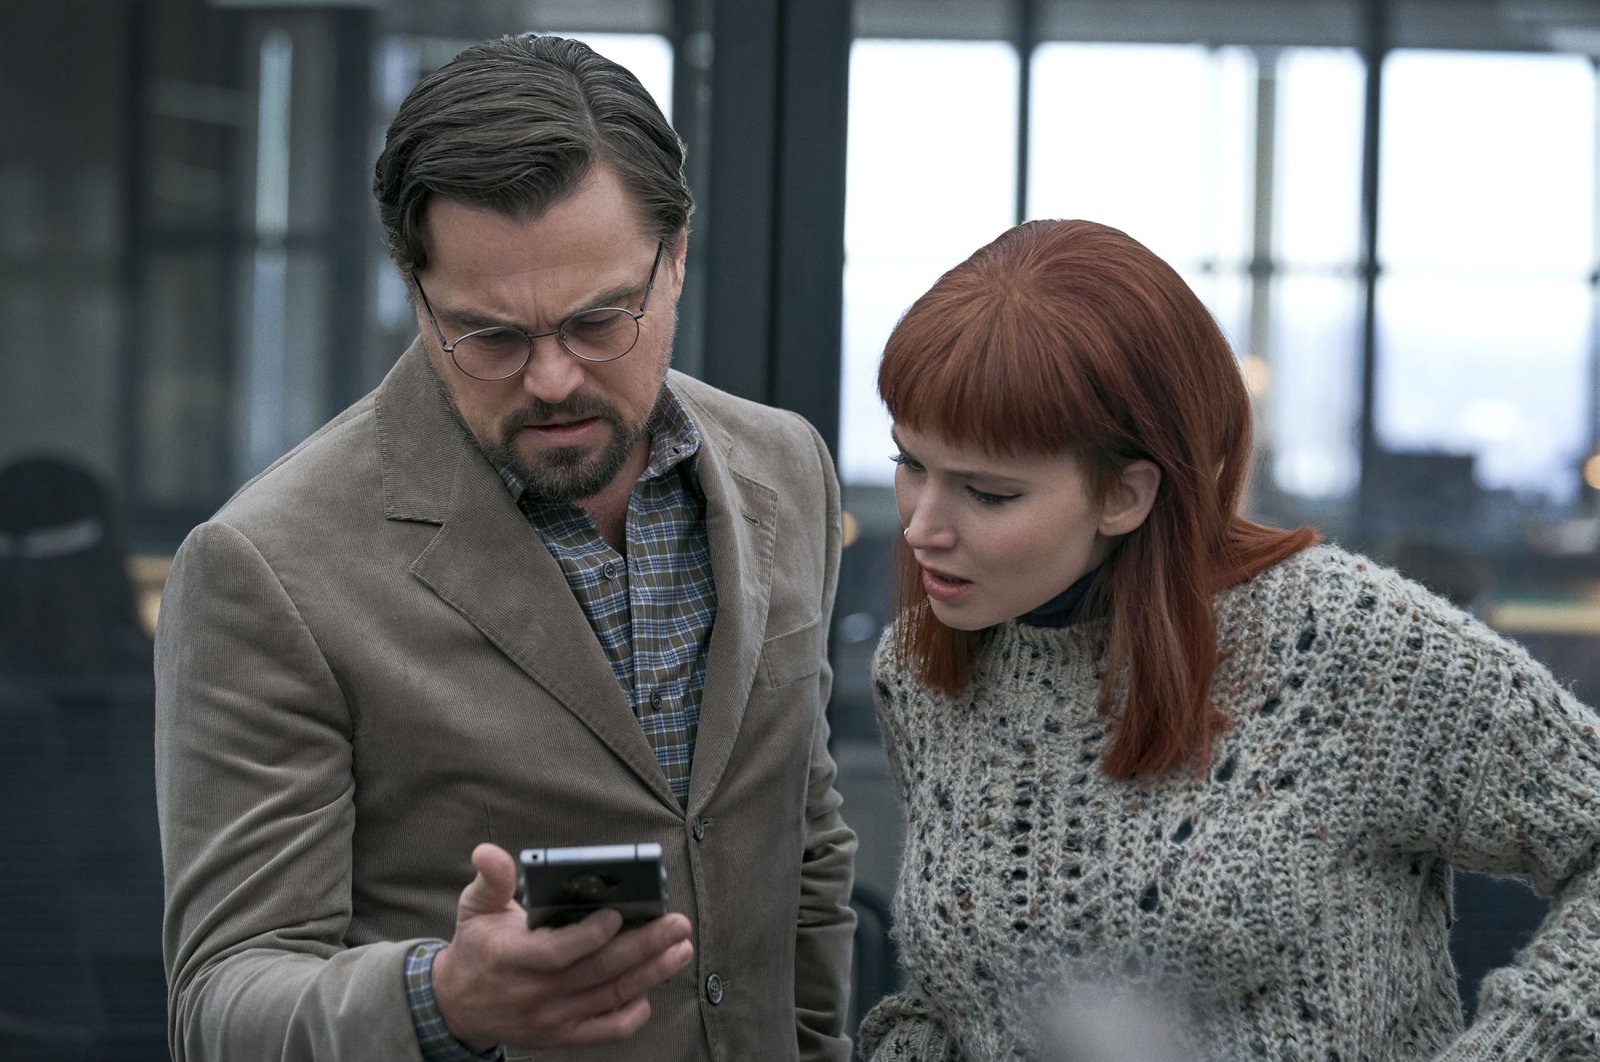 Leonardo DiCaprio (L) as Dr. Randall Mindy and Jennifer Lawrence as Kate Dibiasky, in a scene from the film “Don&#039;t Look Up.” (Netflix via AP)